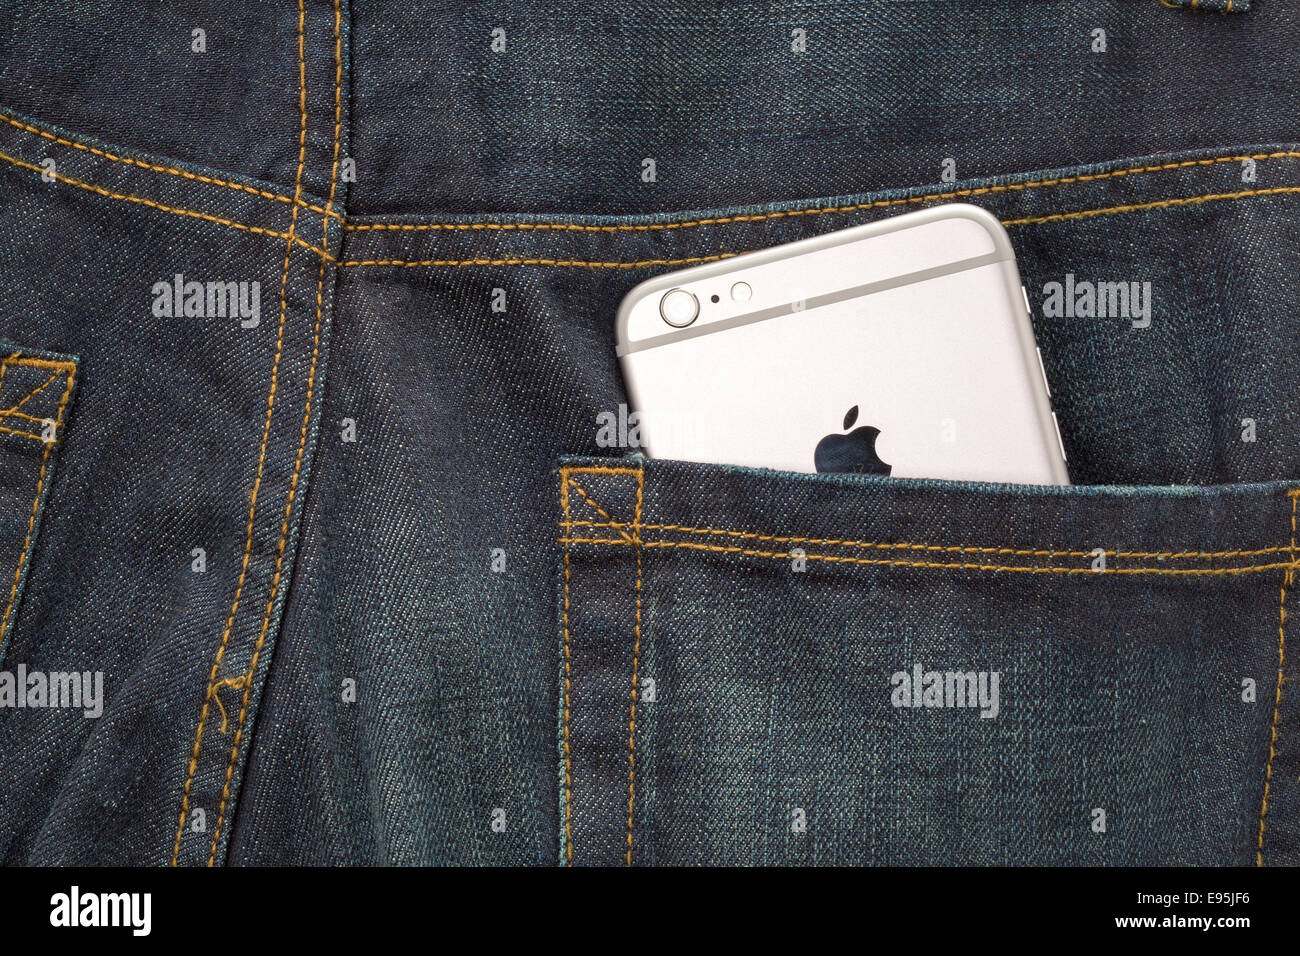 A new Apple iPhone 6 in the back pocket of a pair of denim jeans Stock Photo